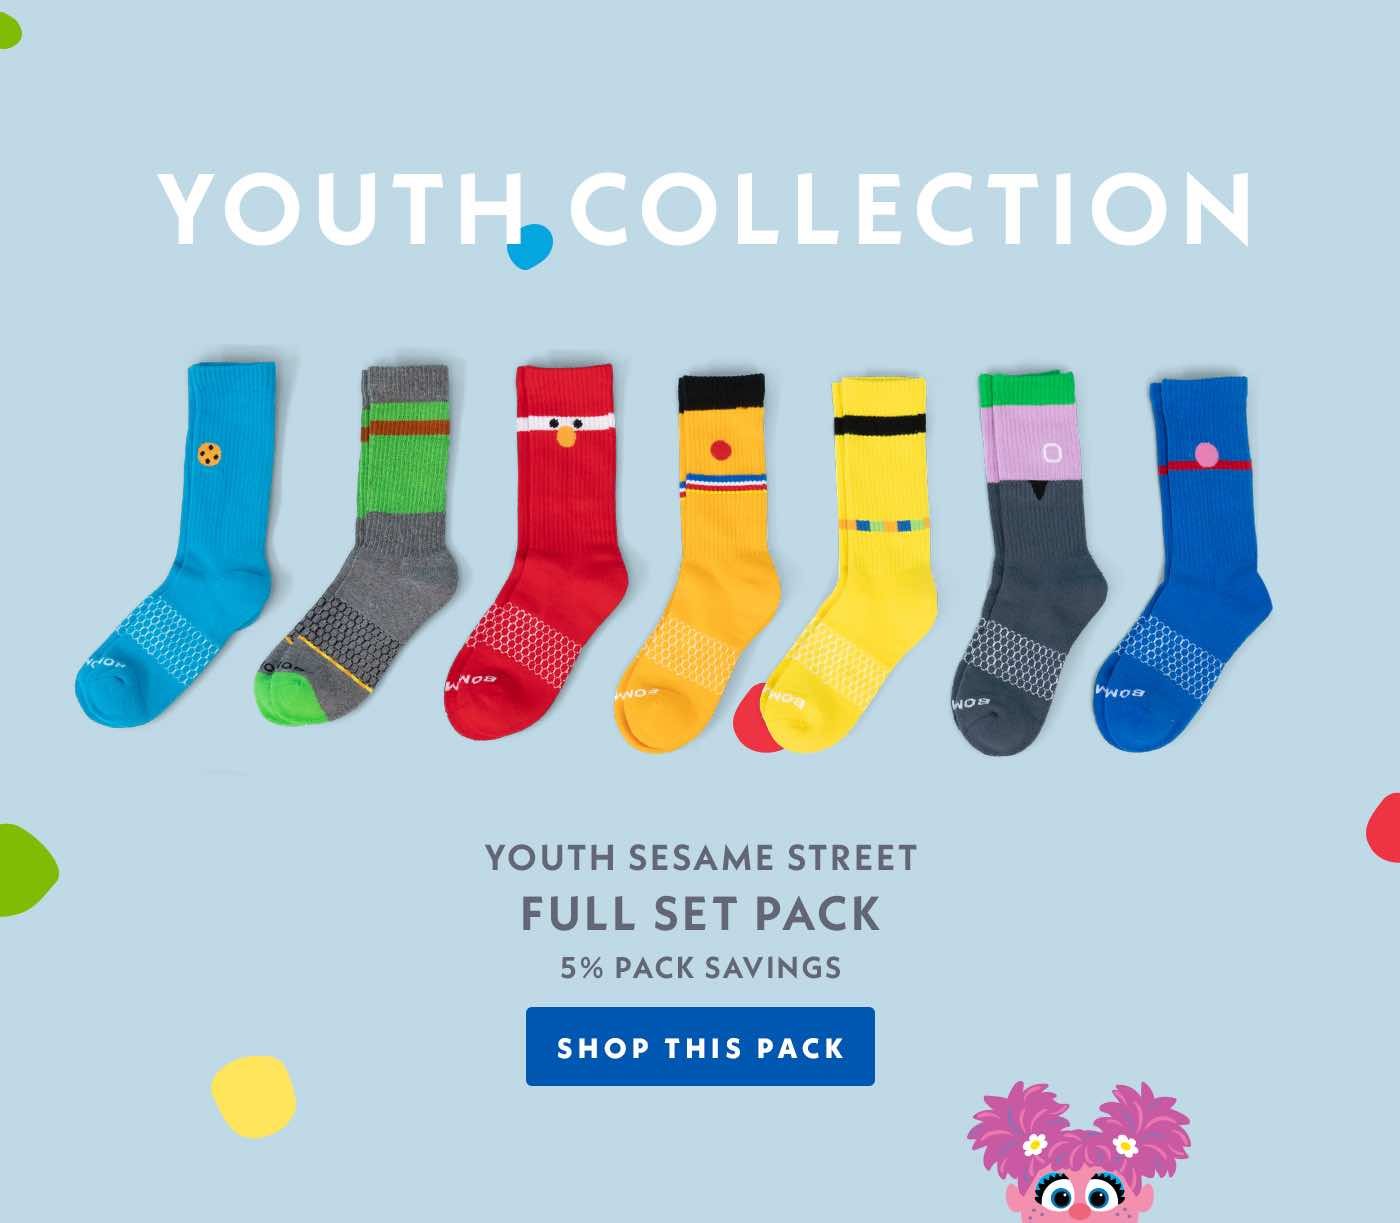 Youth Sesame Street Full Set Pack. Shop This Pack.